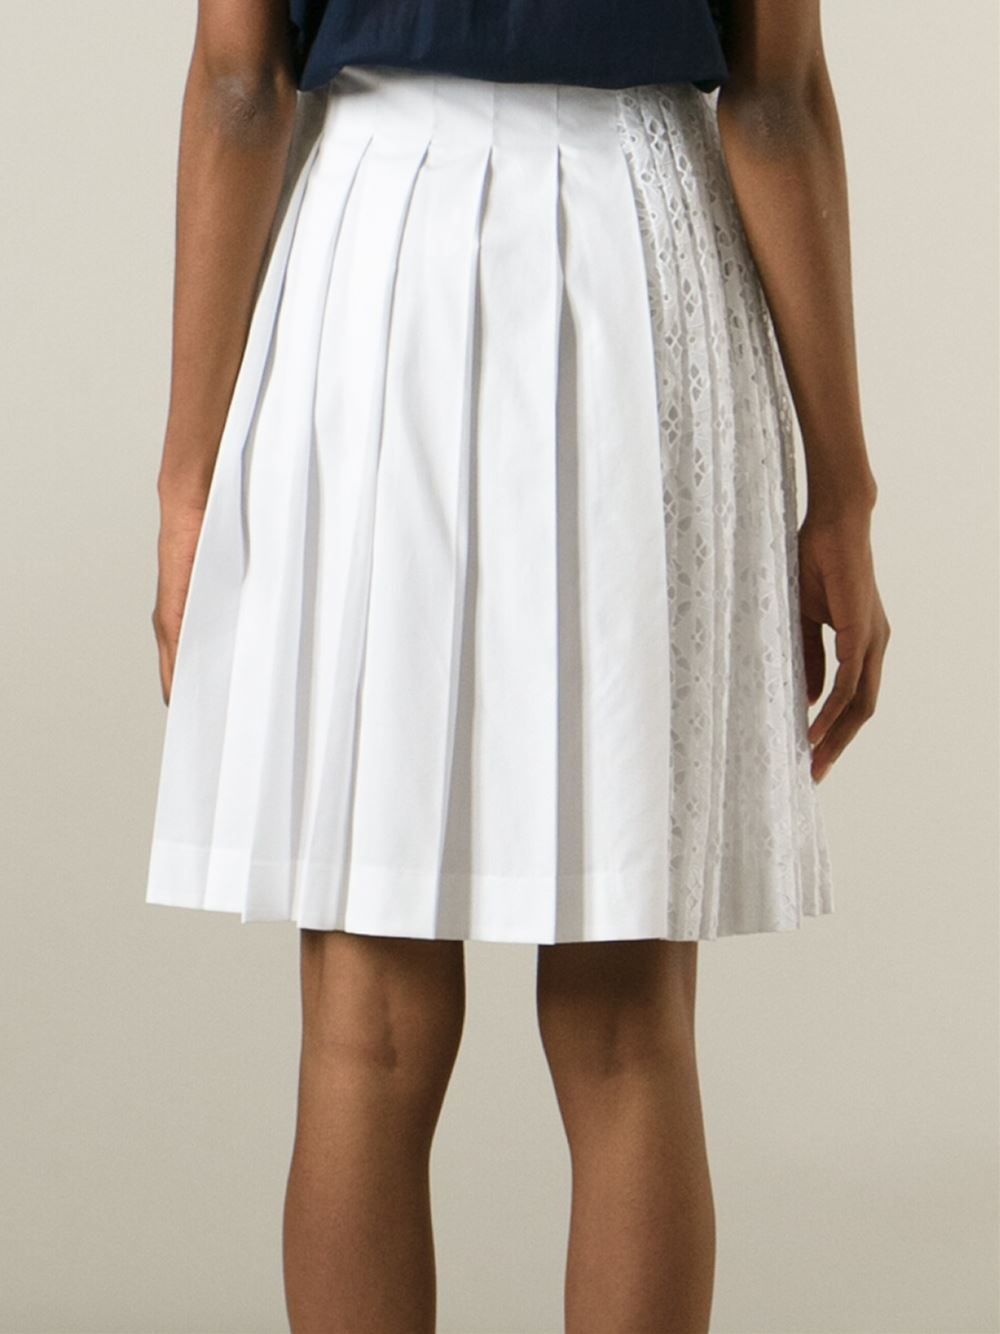 Lyst - N°21 Lace Detail Pleated Skirt in White